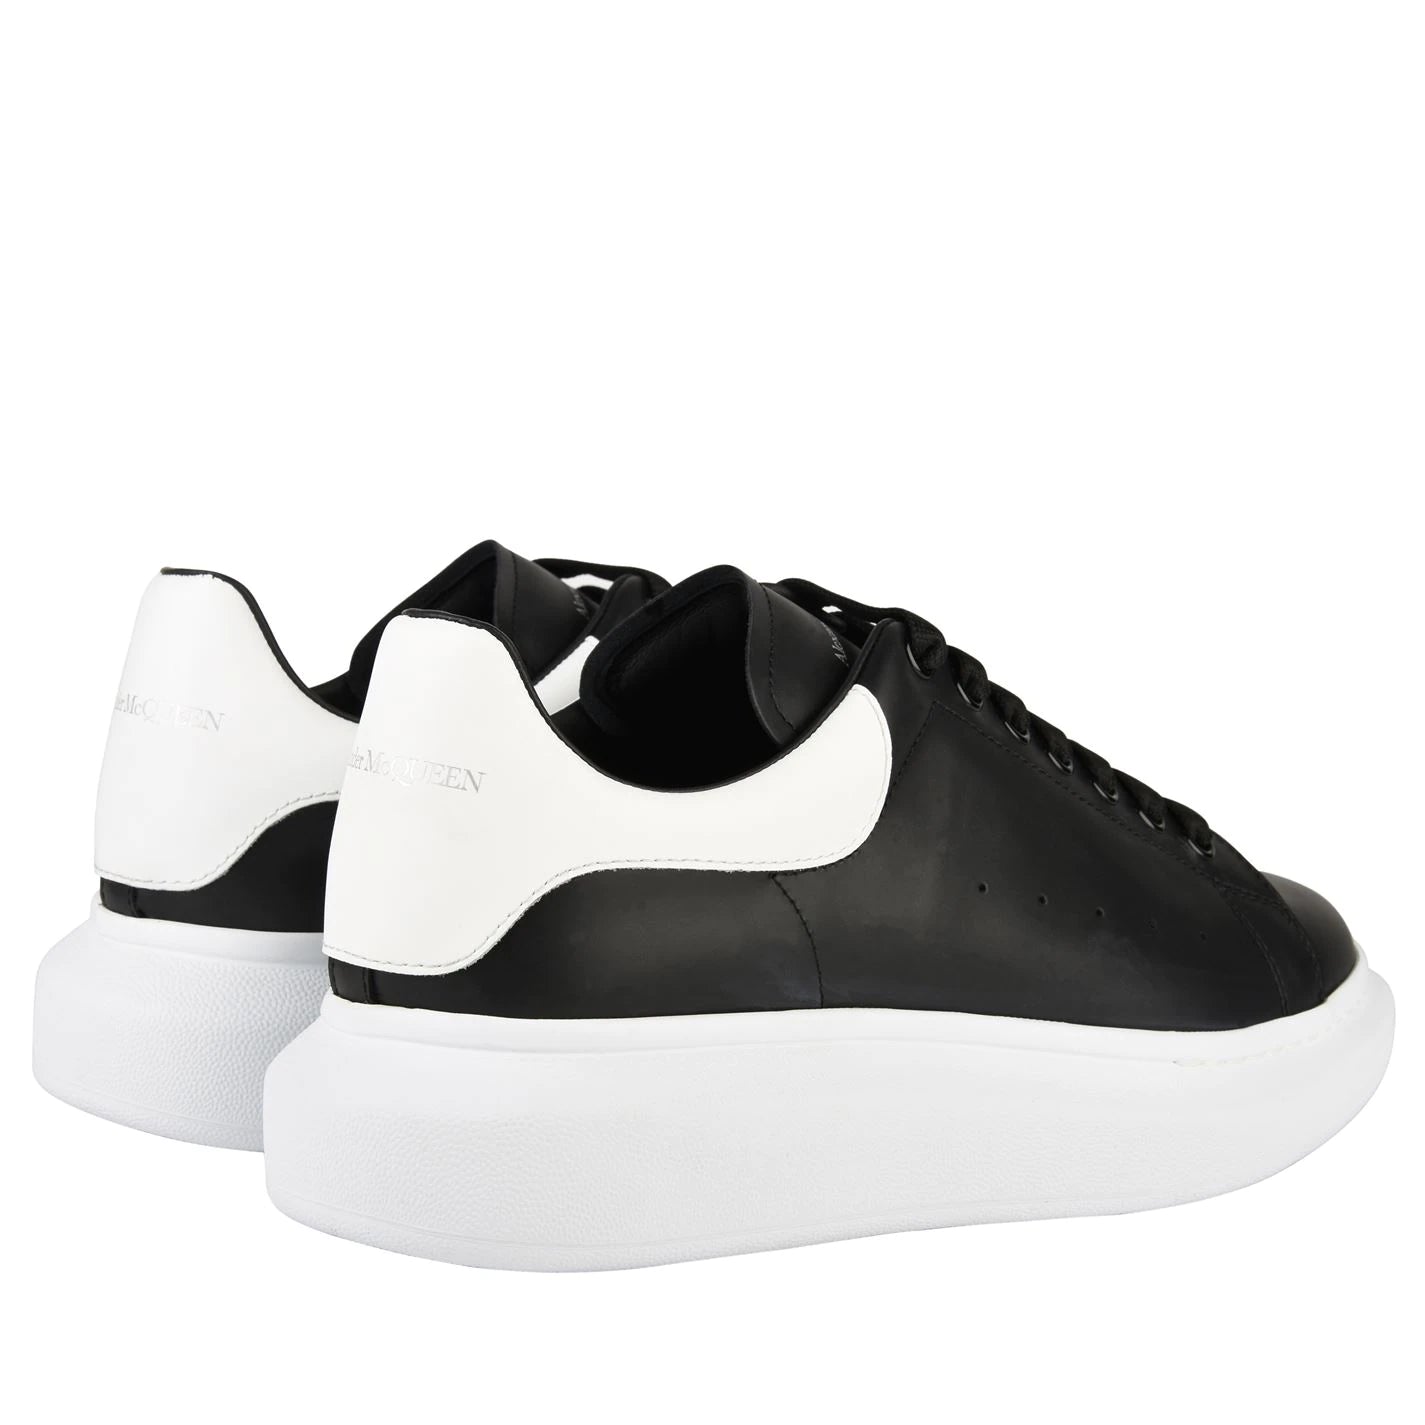 Double Boxed  419.99 Alexander McQueen Oversized Black White Tab Men's Double Boxed